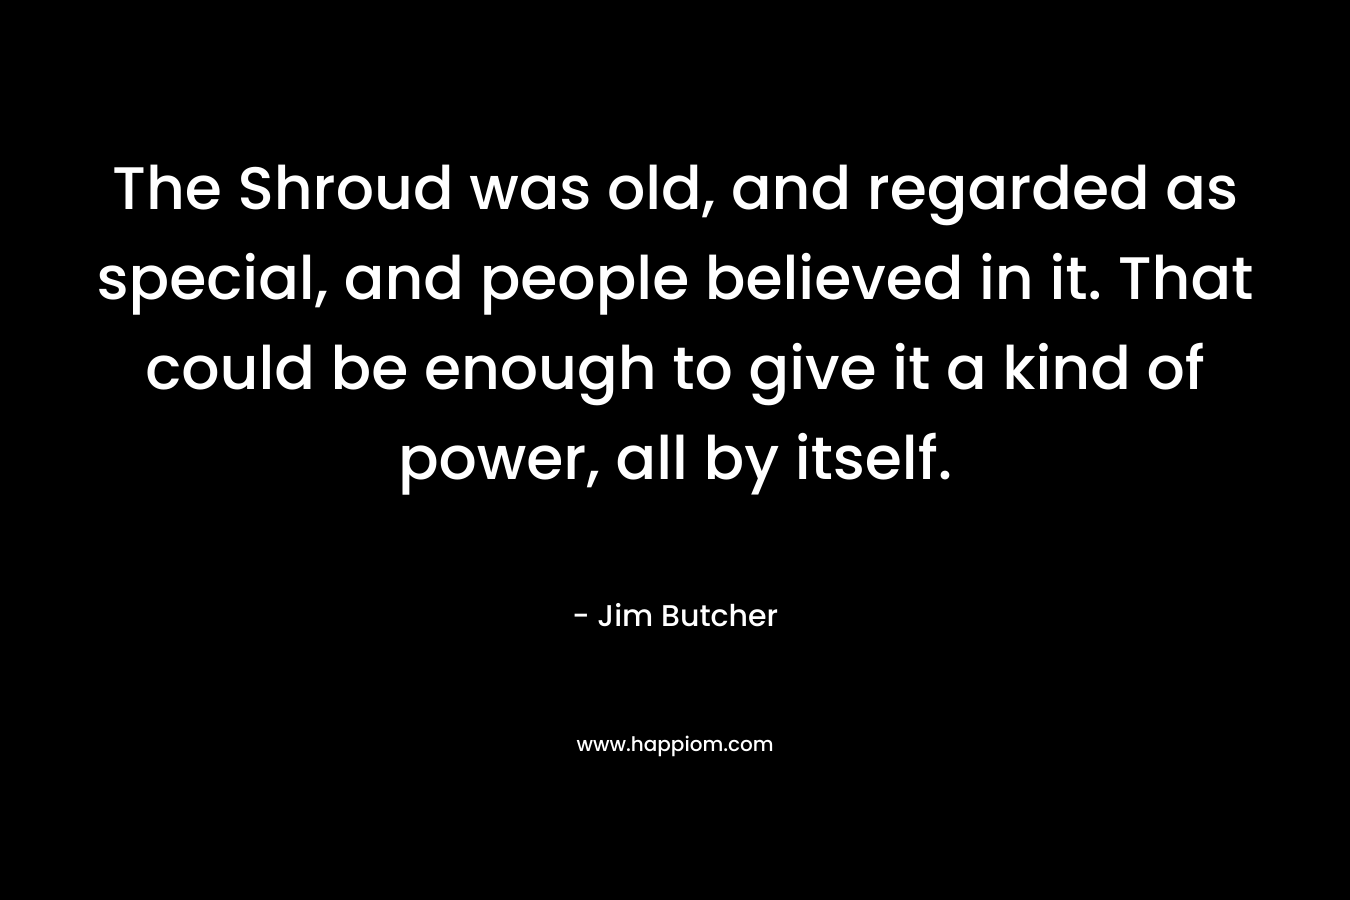 The Shroud was old, and regarded as special, and people believed in it. That could be enough to give it a kind of power, all by itself. – Jim Butcher